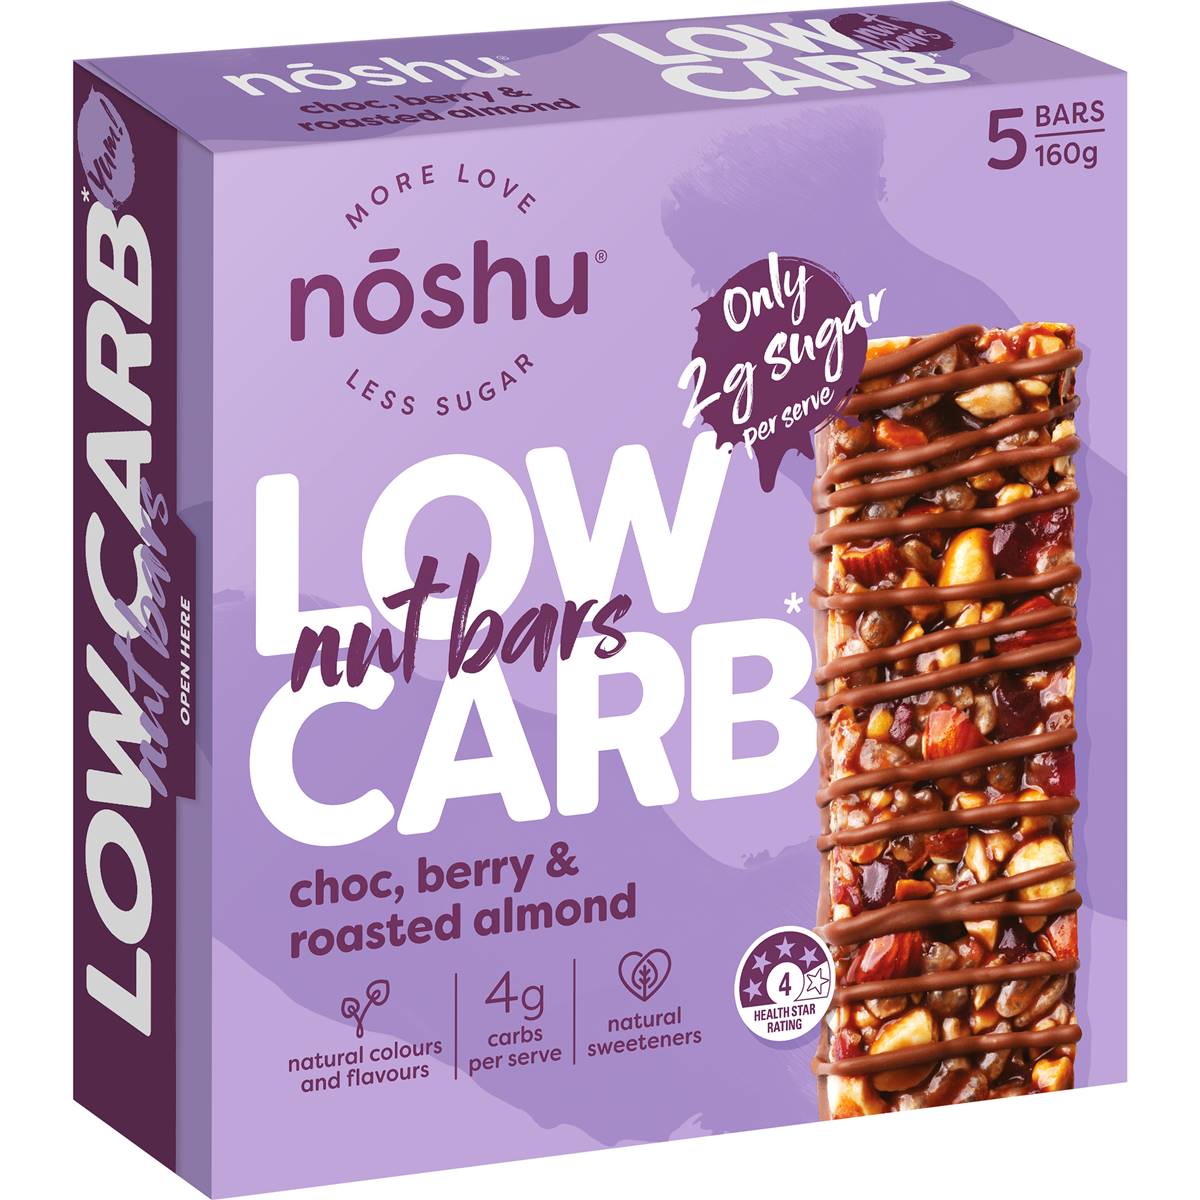 Calories in Noshu Low Carb Nut Bars Chocolate, Berry & Roasted Almond